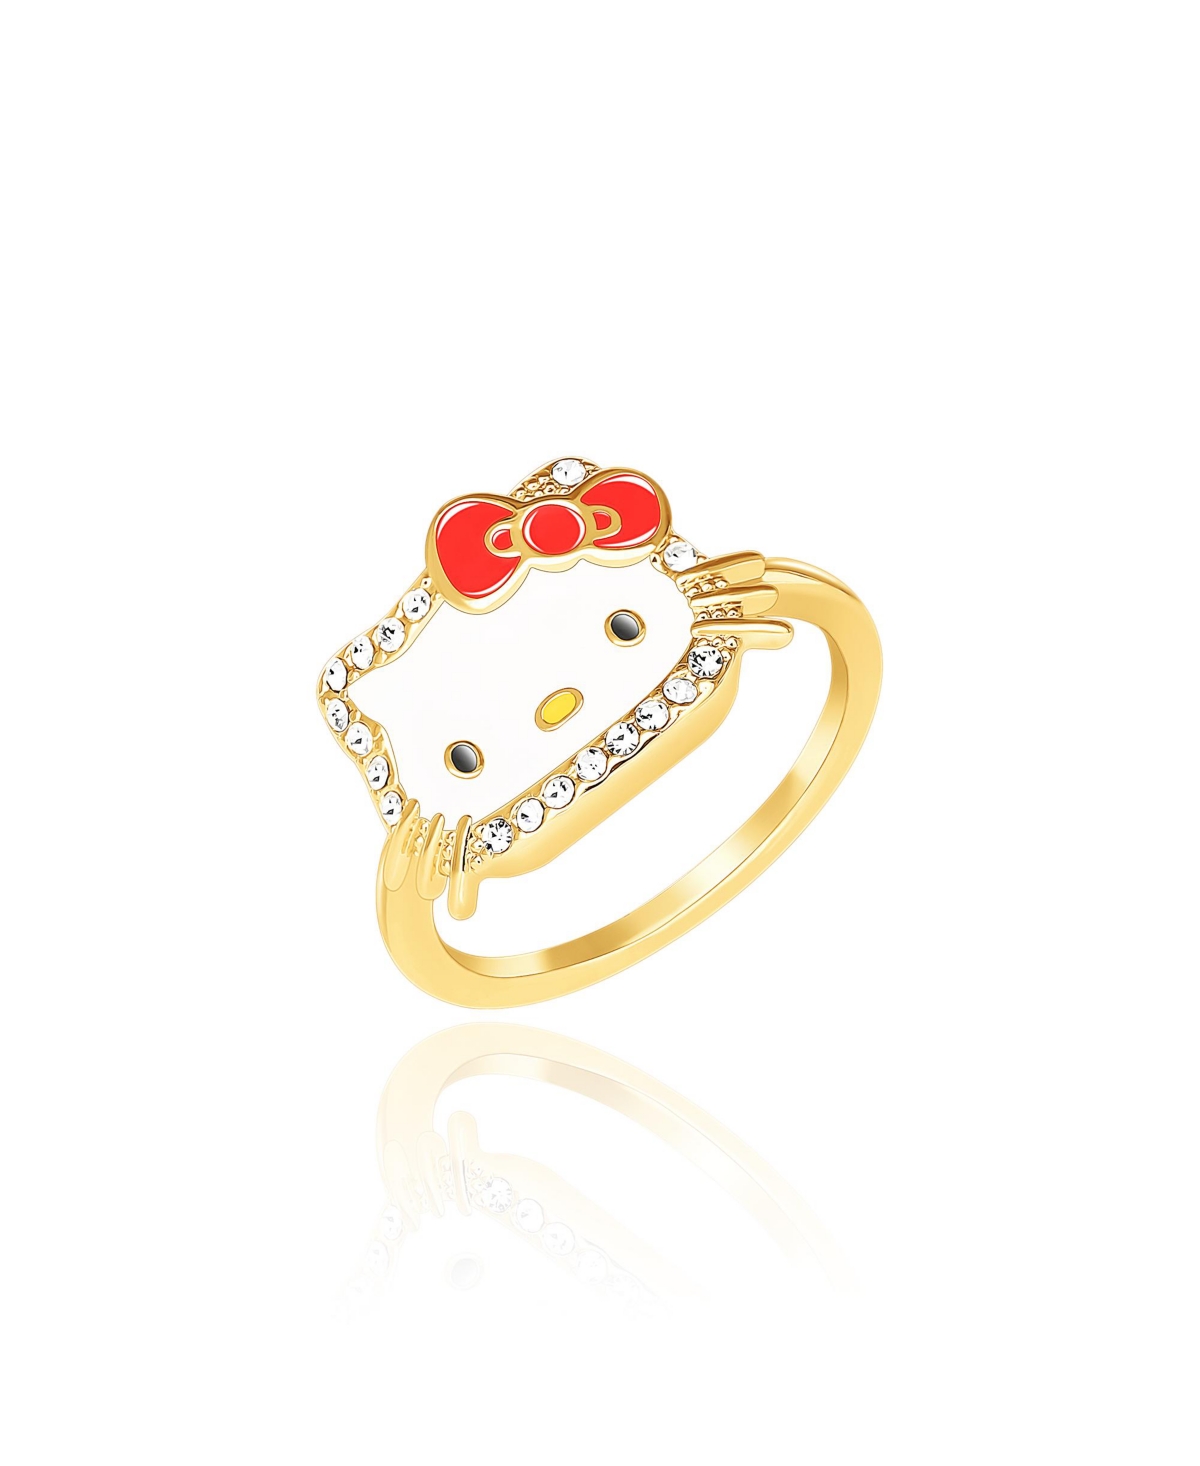 Sanrio Hello Kitty Yellow Gold Plated Crystal Face Jewelry Ring - Size 7 - White, red, gold tone